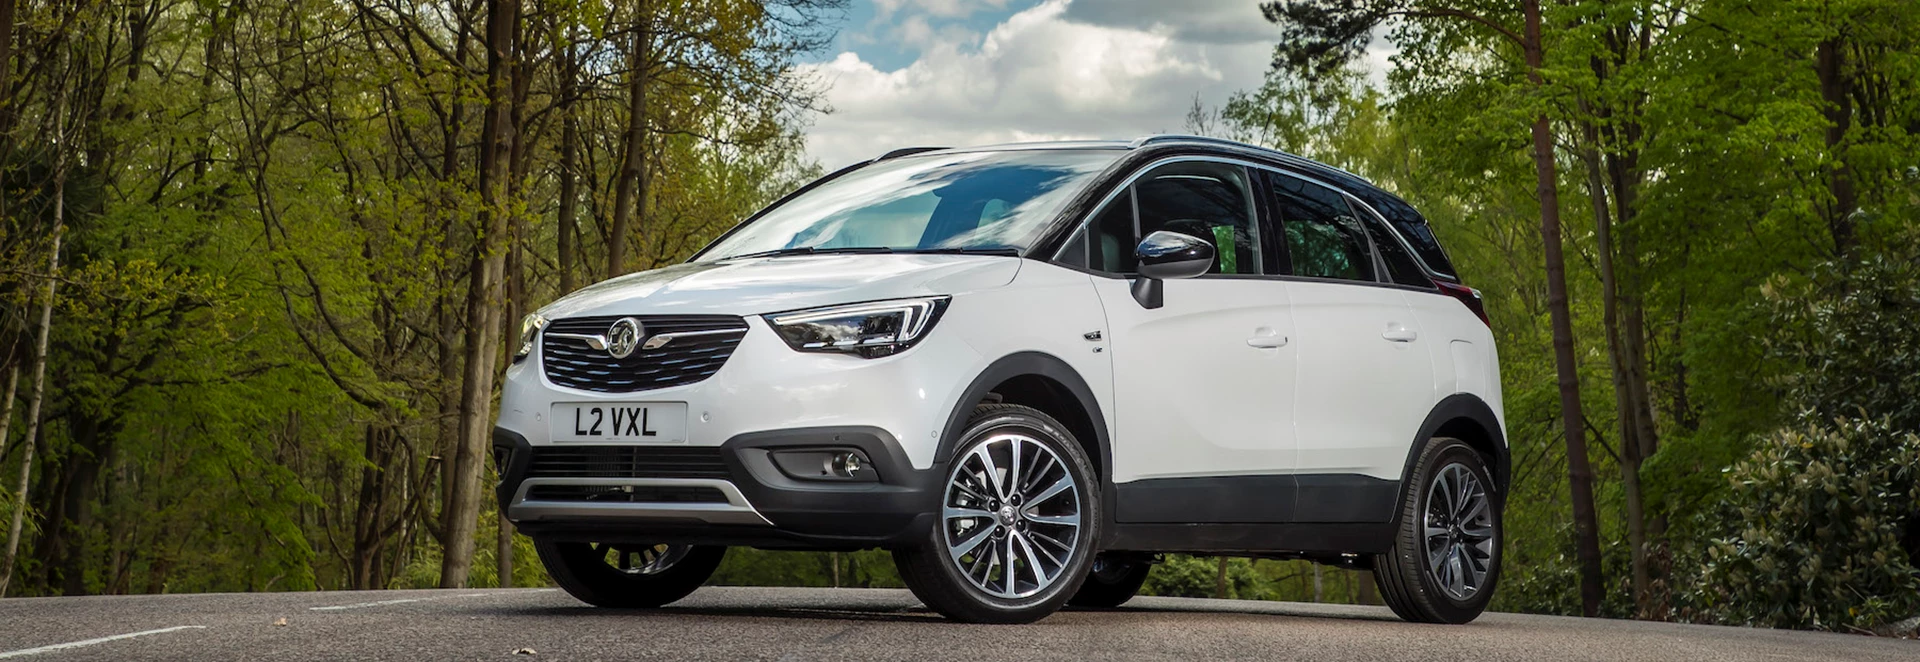 Buyer’s guide to the Vauxhall Crossland X